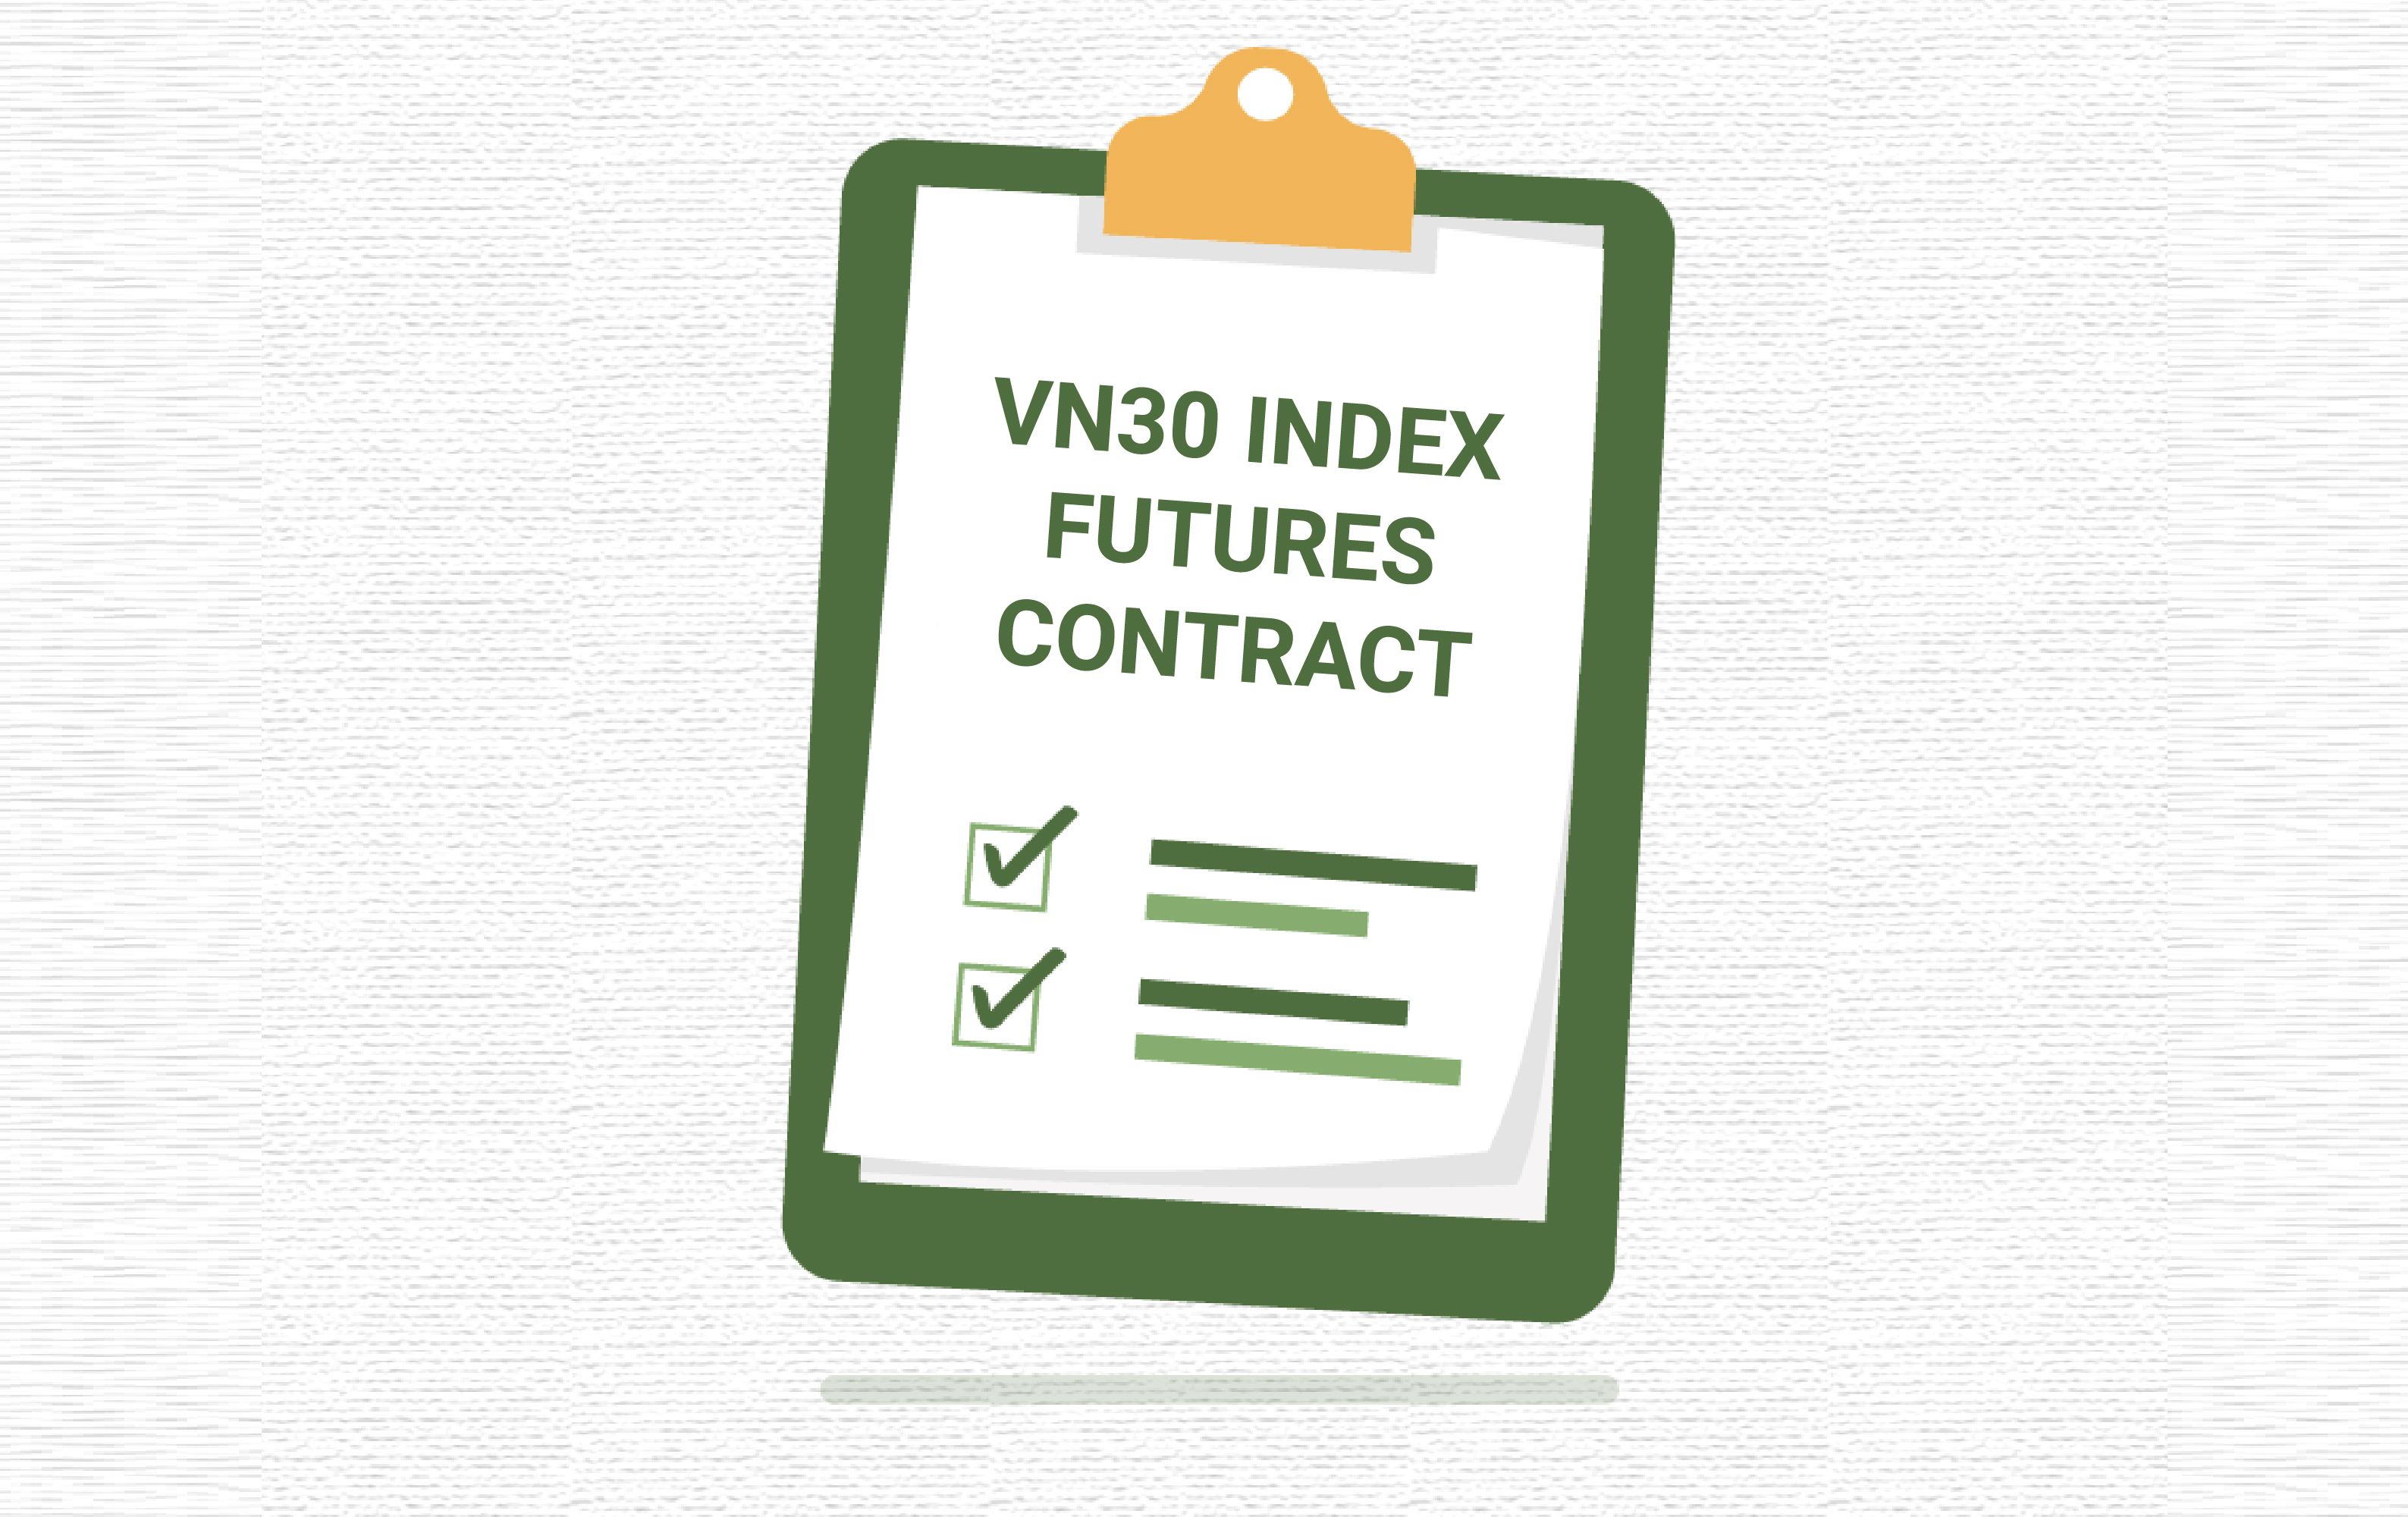 V N30 Index Futures Contract (1)